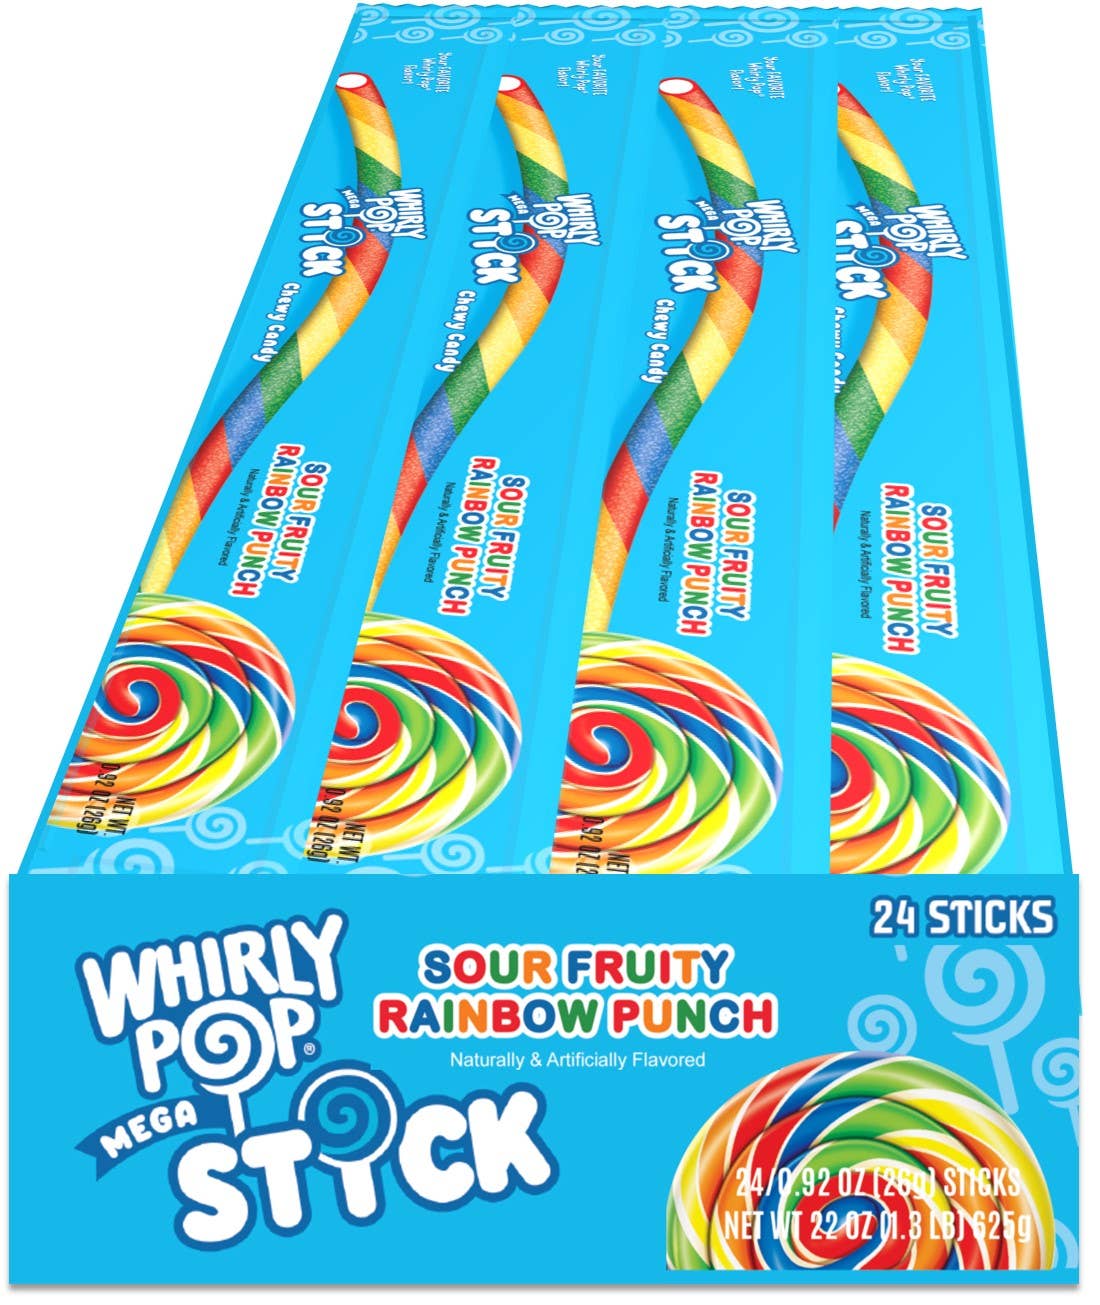 Whirly Pop Mega Stick Sour Fruity Chewy Candy .92oz, 24ct